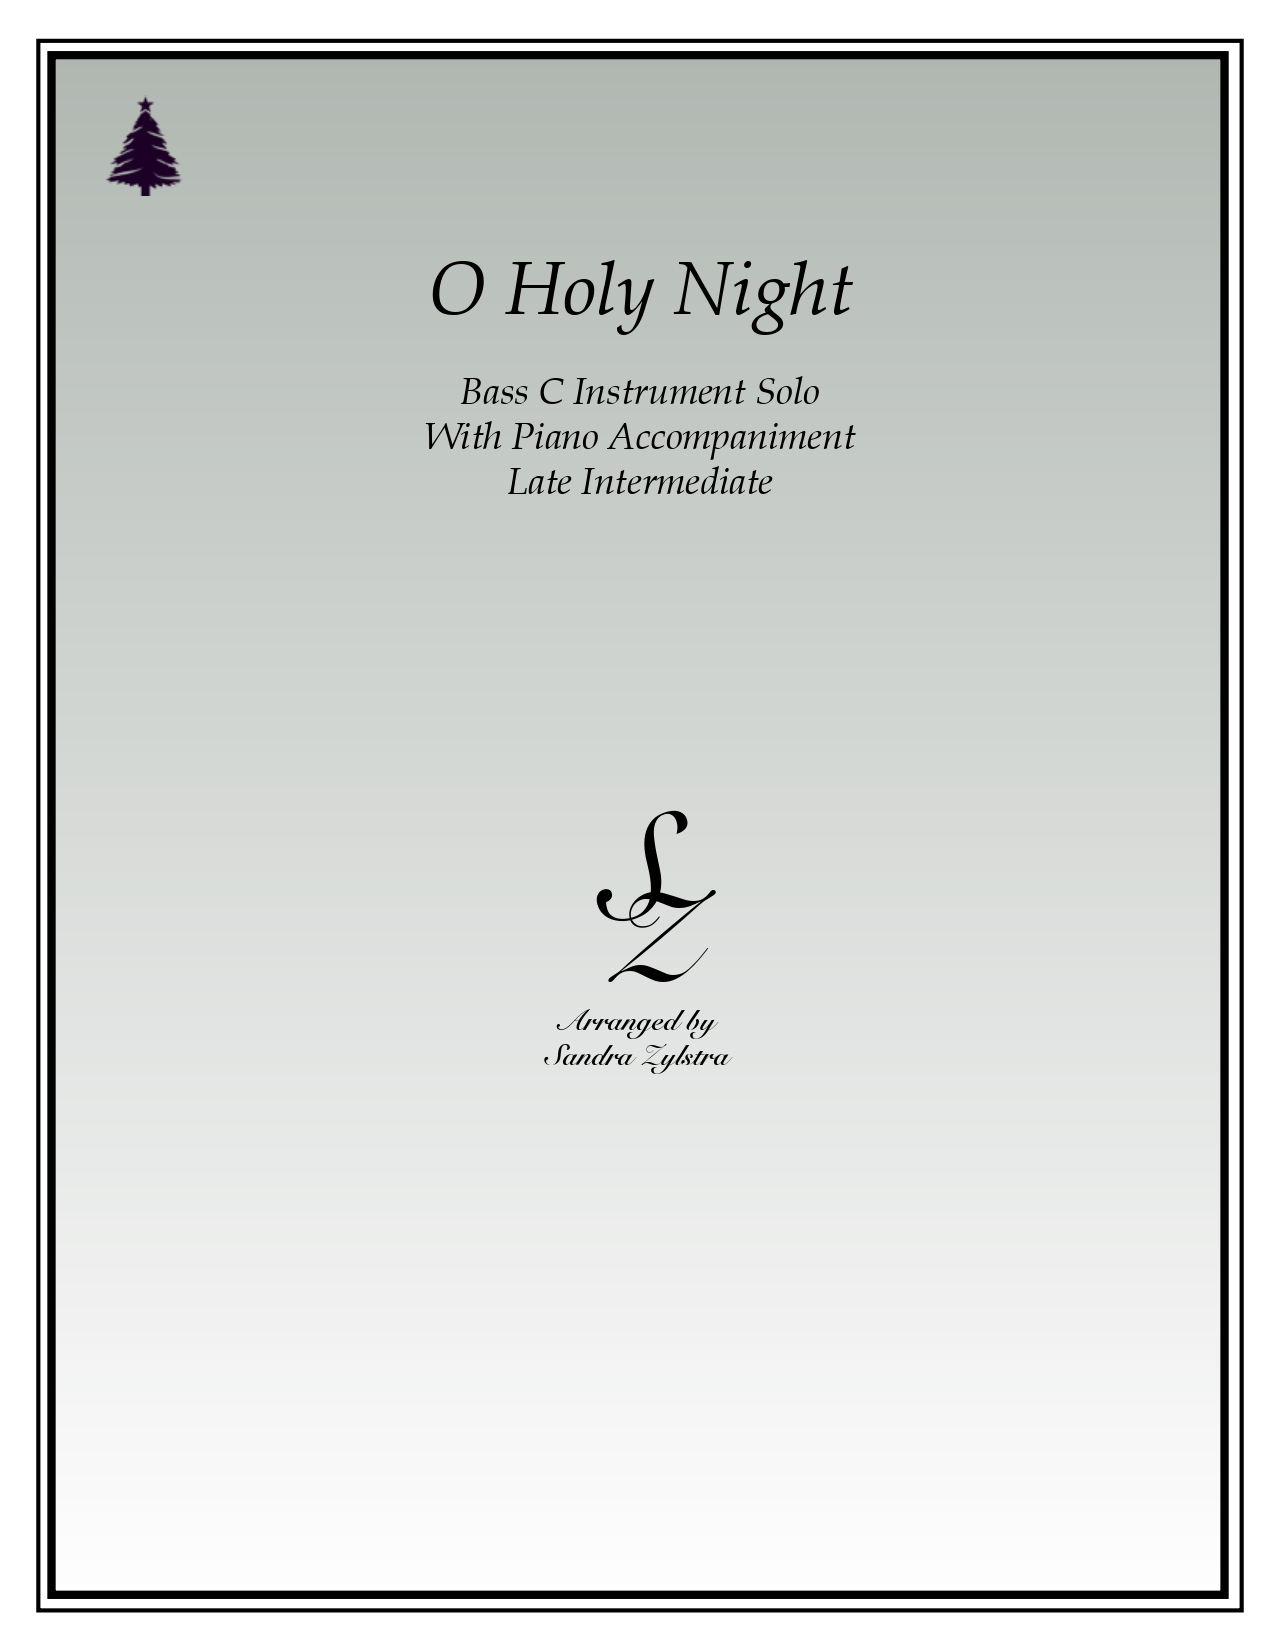 O Holy Night bass C instrument solo part cover page 00011